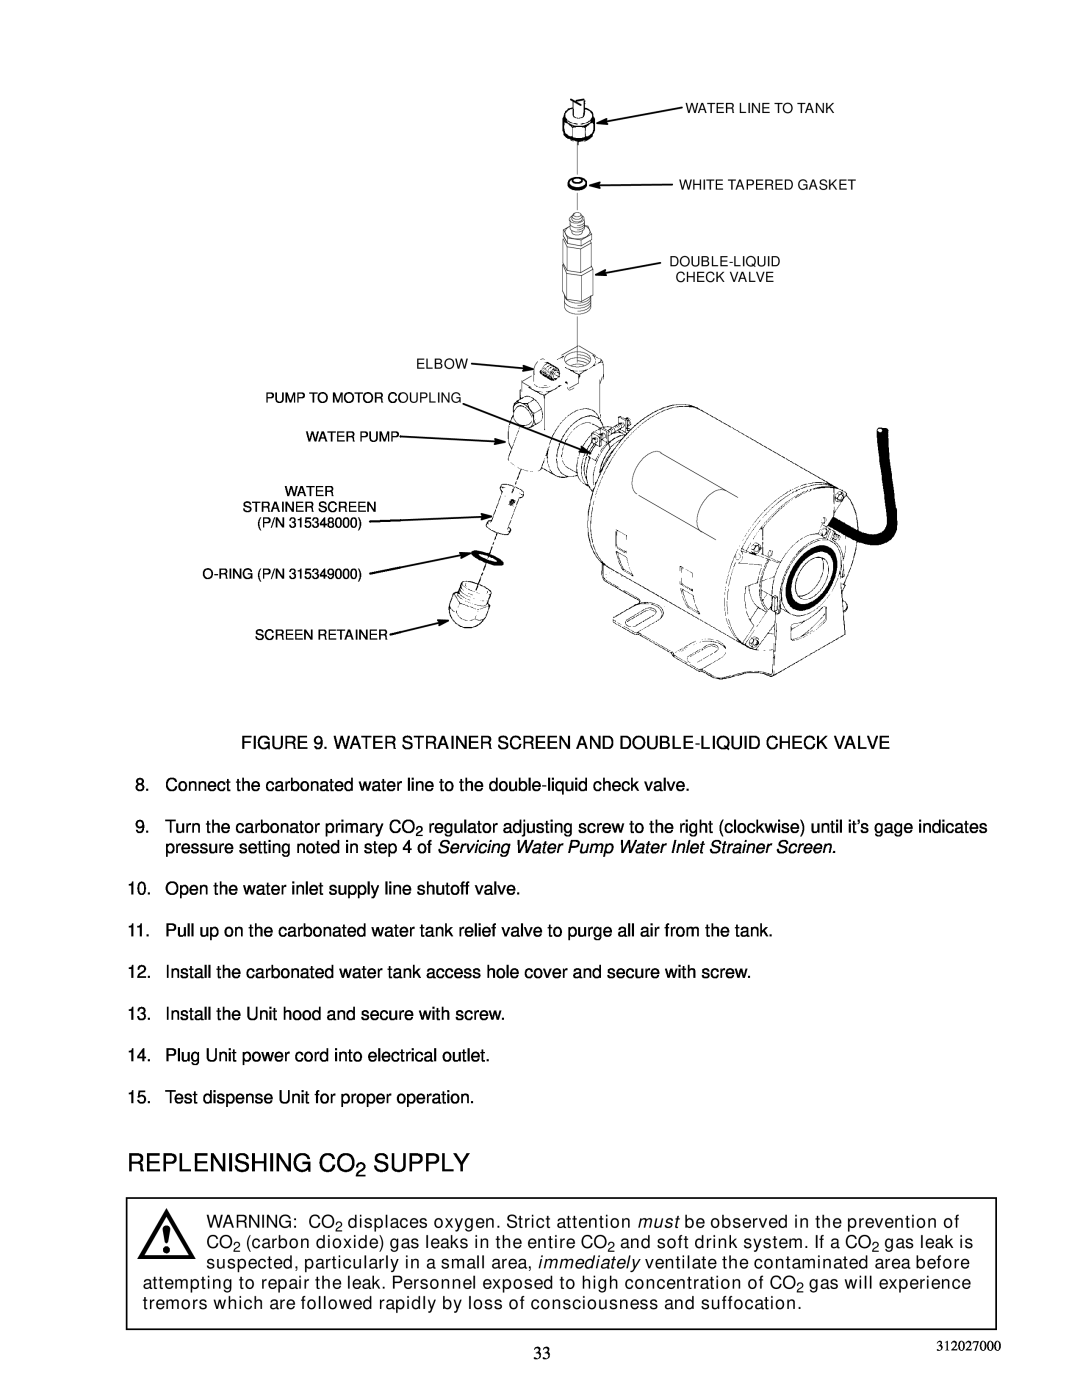 Cornelius R-134A service manual REPLENISHING CO2 SUPPLY, Connect the carbonated water line to the double-liquid check valve 